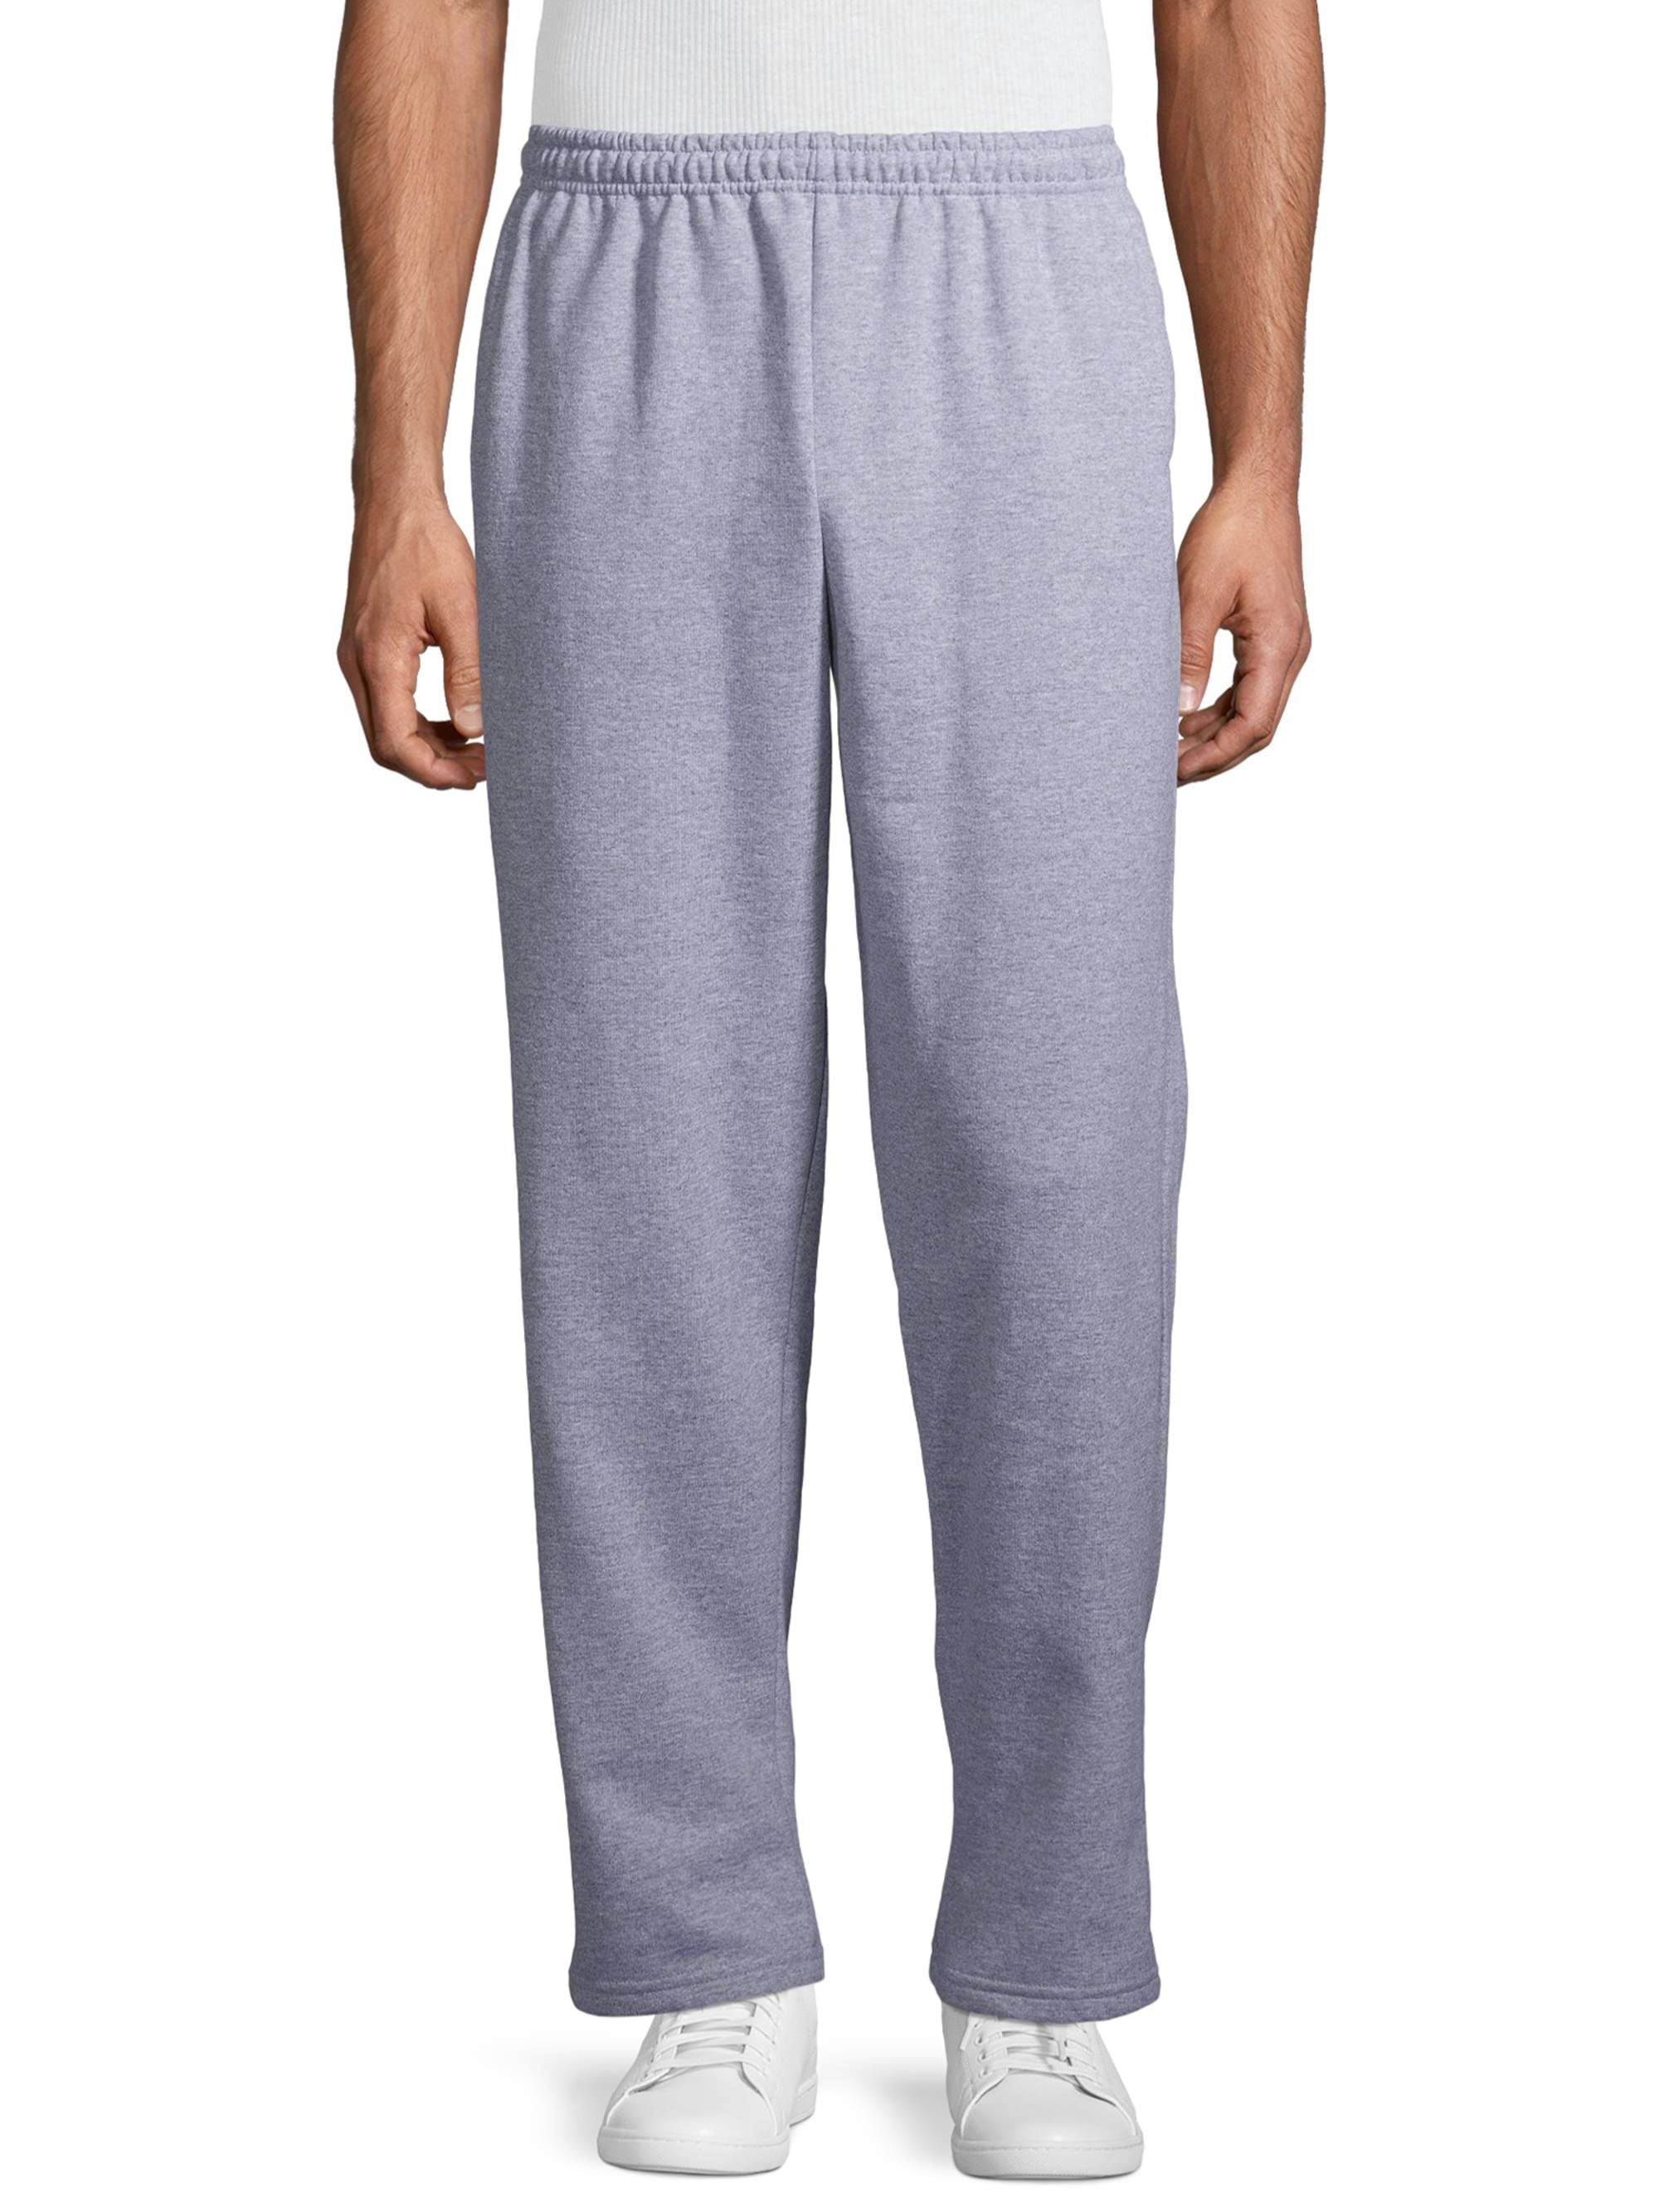 What Are Open Bottom Sweatpants? – solowomen